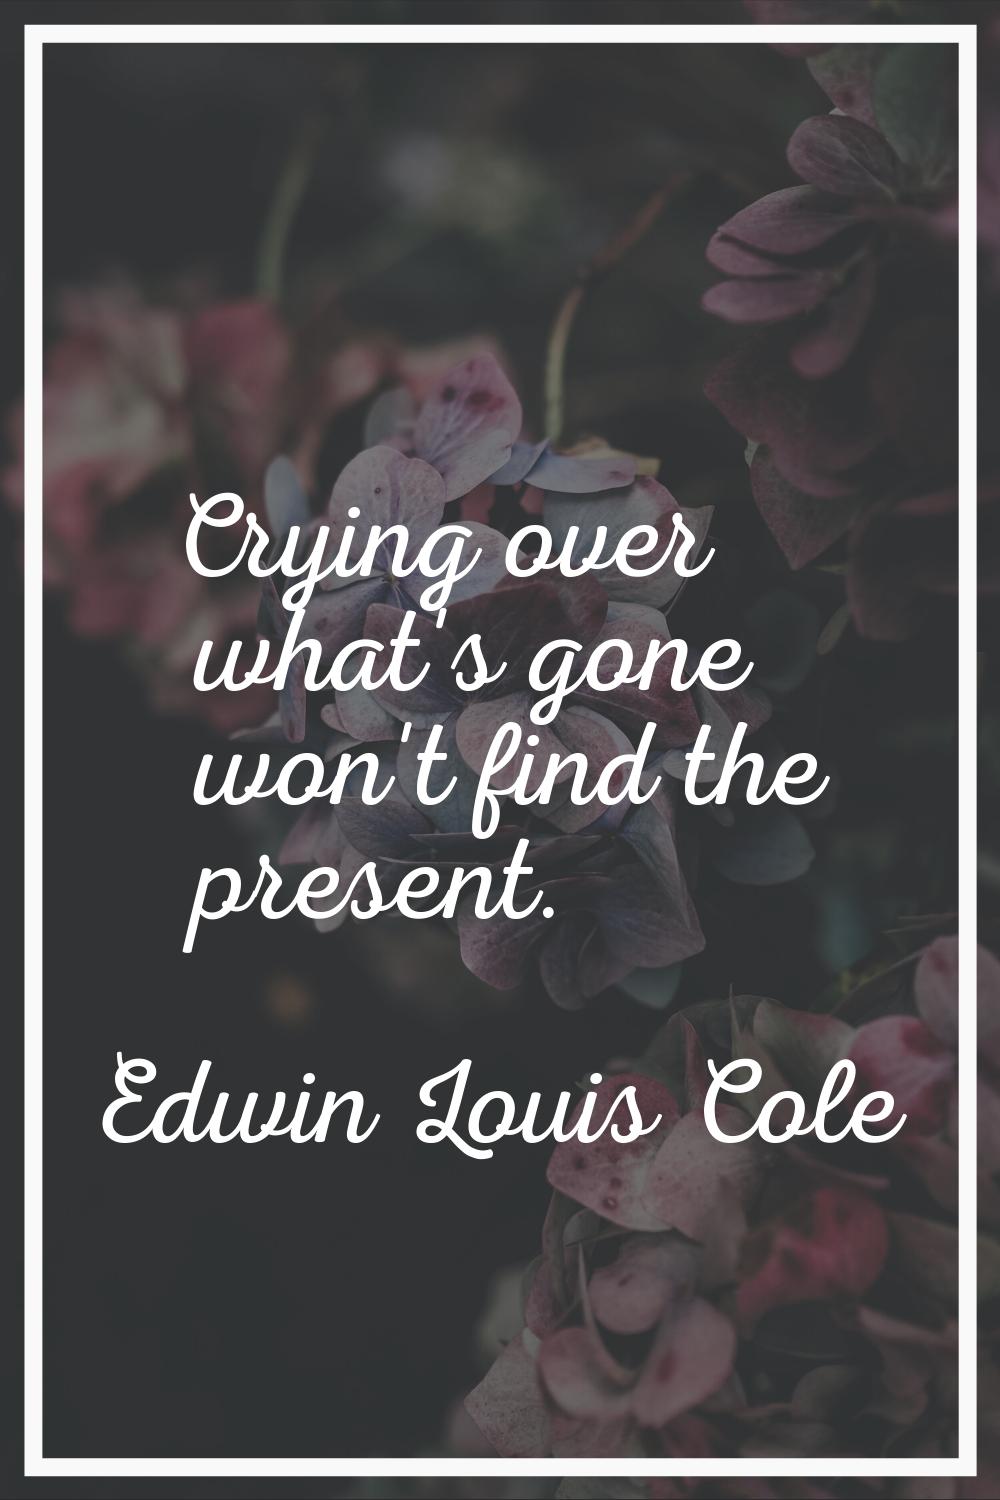 Crying over what's gone won't find the present.